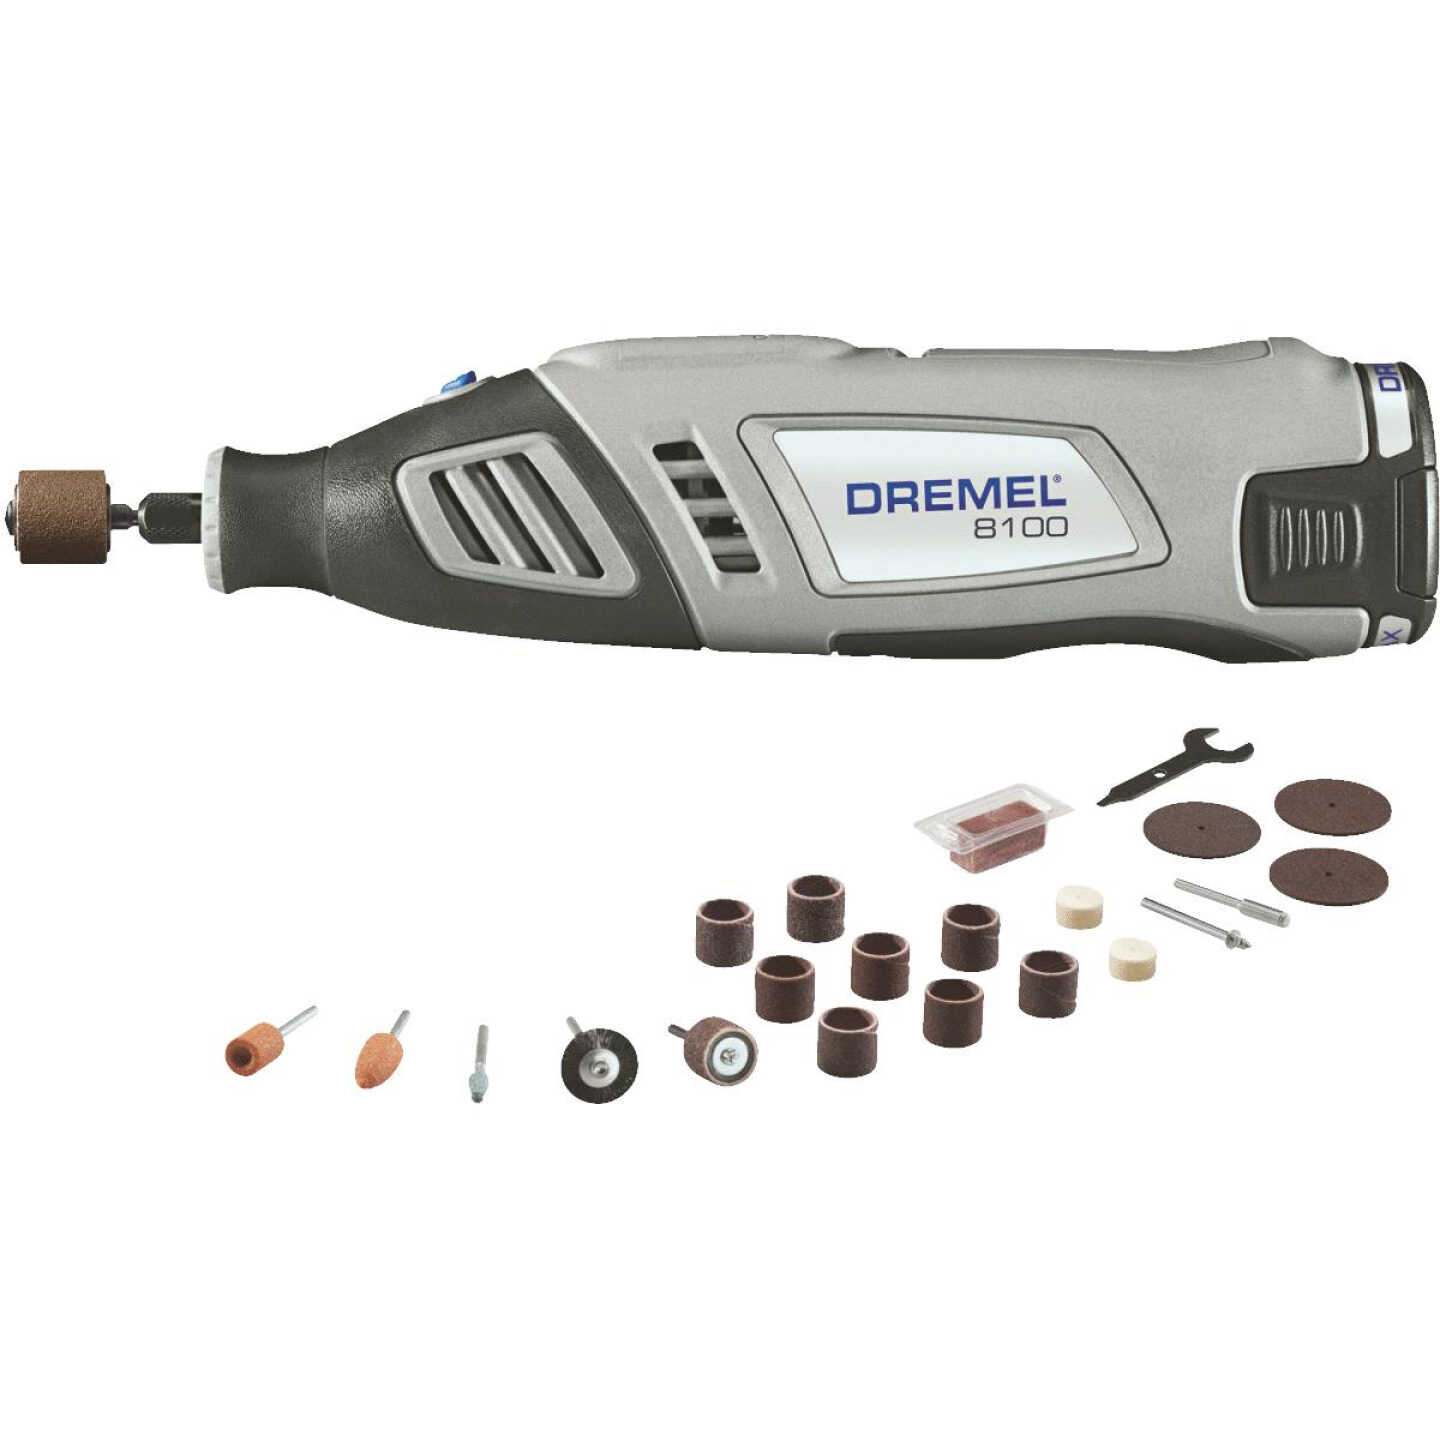 Sanding Bits for Dremel Rotary Tool, Grinding Stone Sanding Drill Bits with  1/8 Shank, Aluminium Oxide Tough Enough to Metal Rust